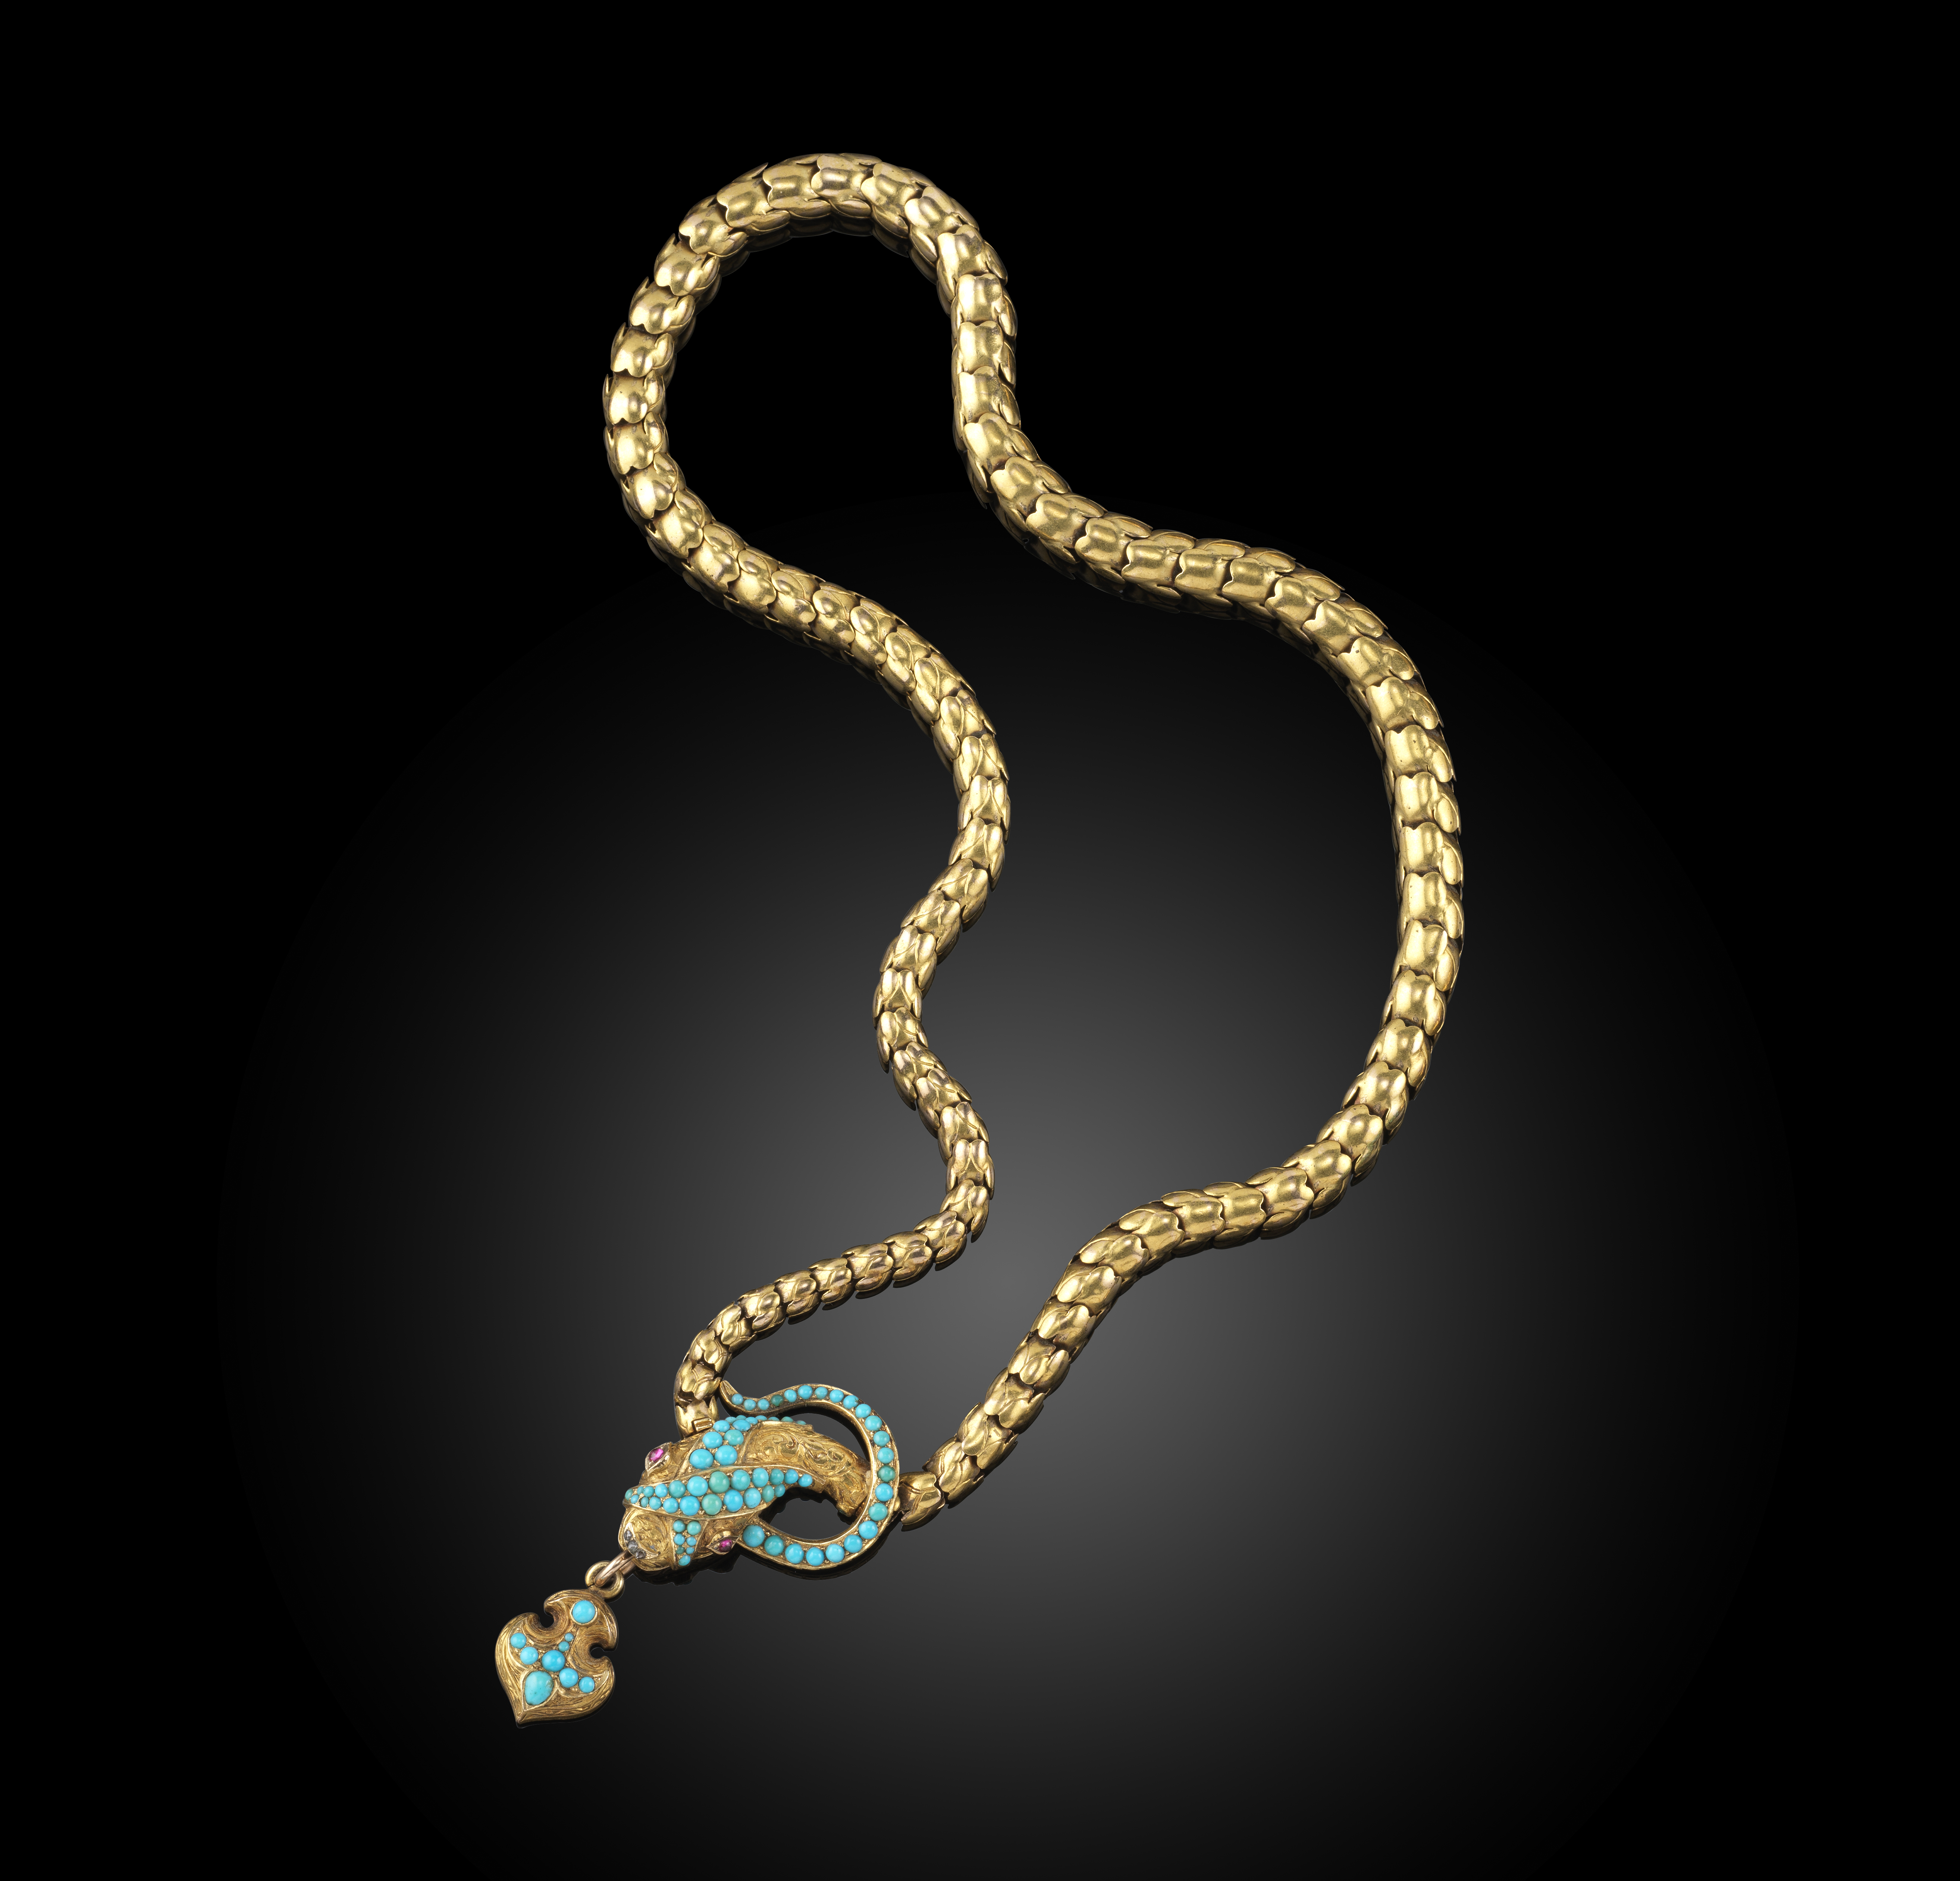 A Victorian gem-set gold snake necklace, mid 19th century, the realistically formed serpent with